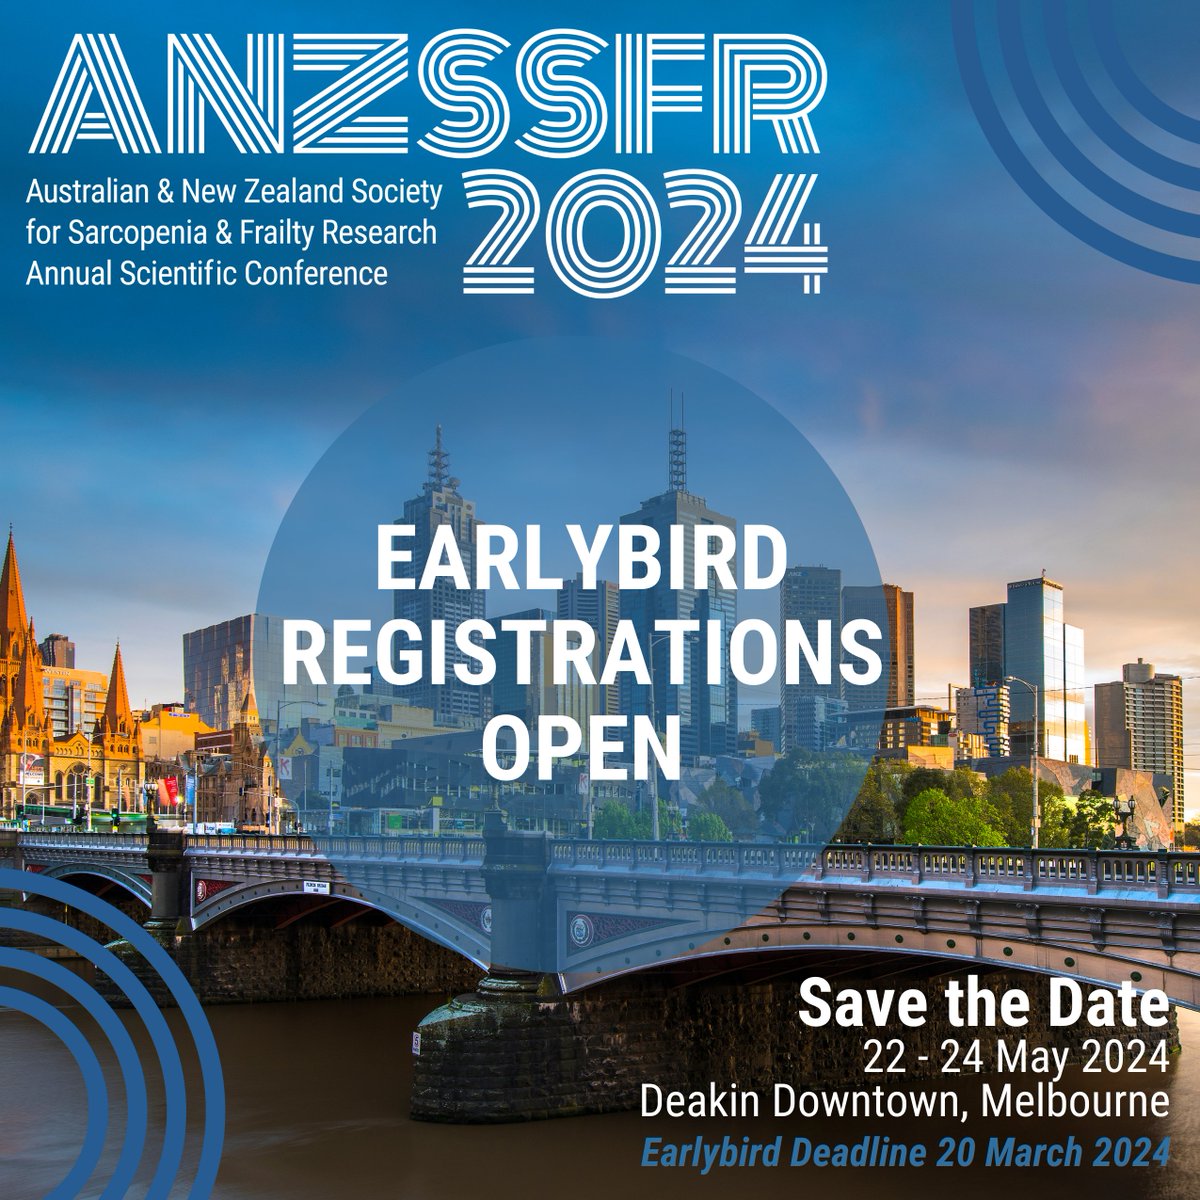 Be sure to join us at the @ANZSSFR 2024 annual scientific conference We welcome you to join our exciting multi-disciplinary meeting with an exciting list of international and local speakers 📅22-24 May 2024 🌏Melbourne, Australia See further details 👇 anzssfrconference.org